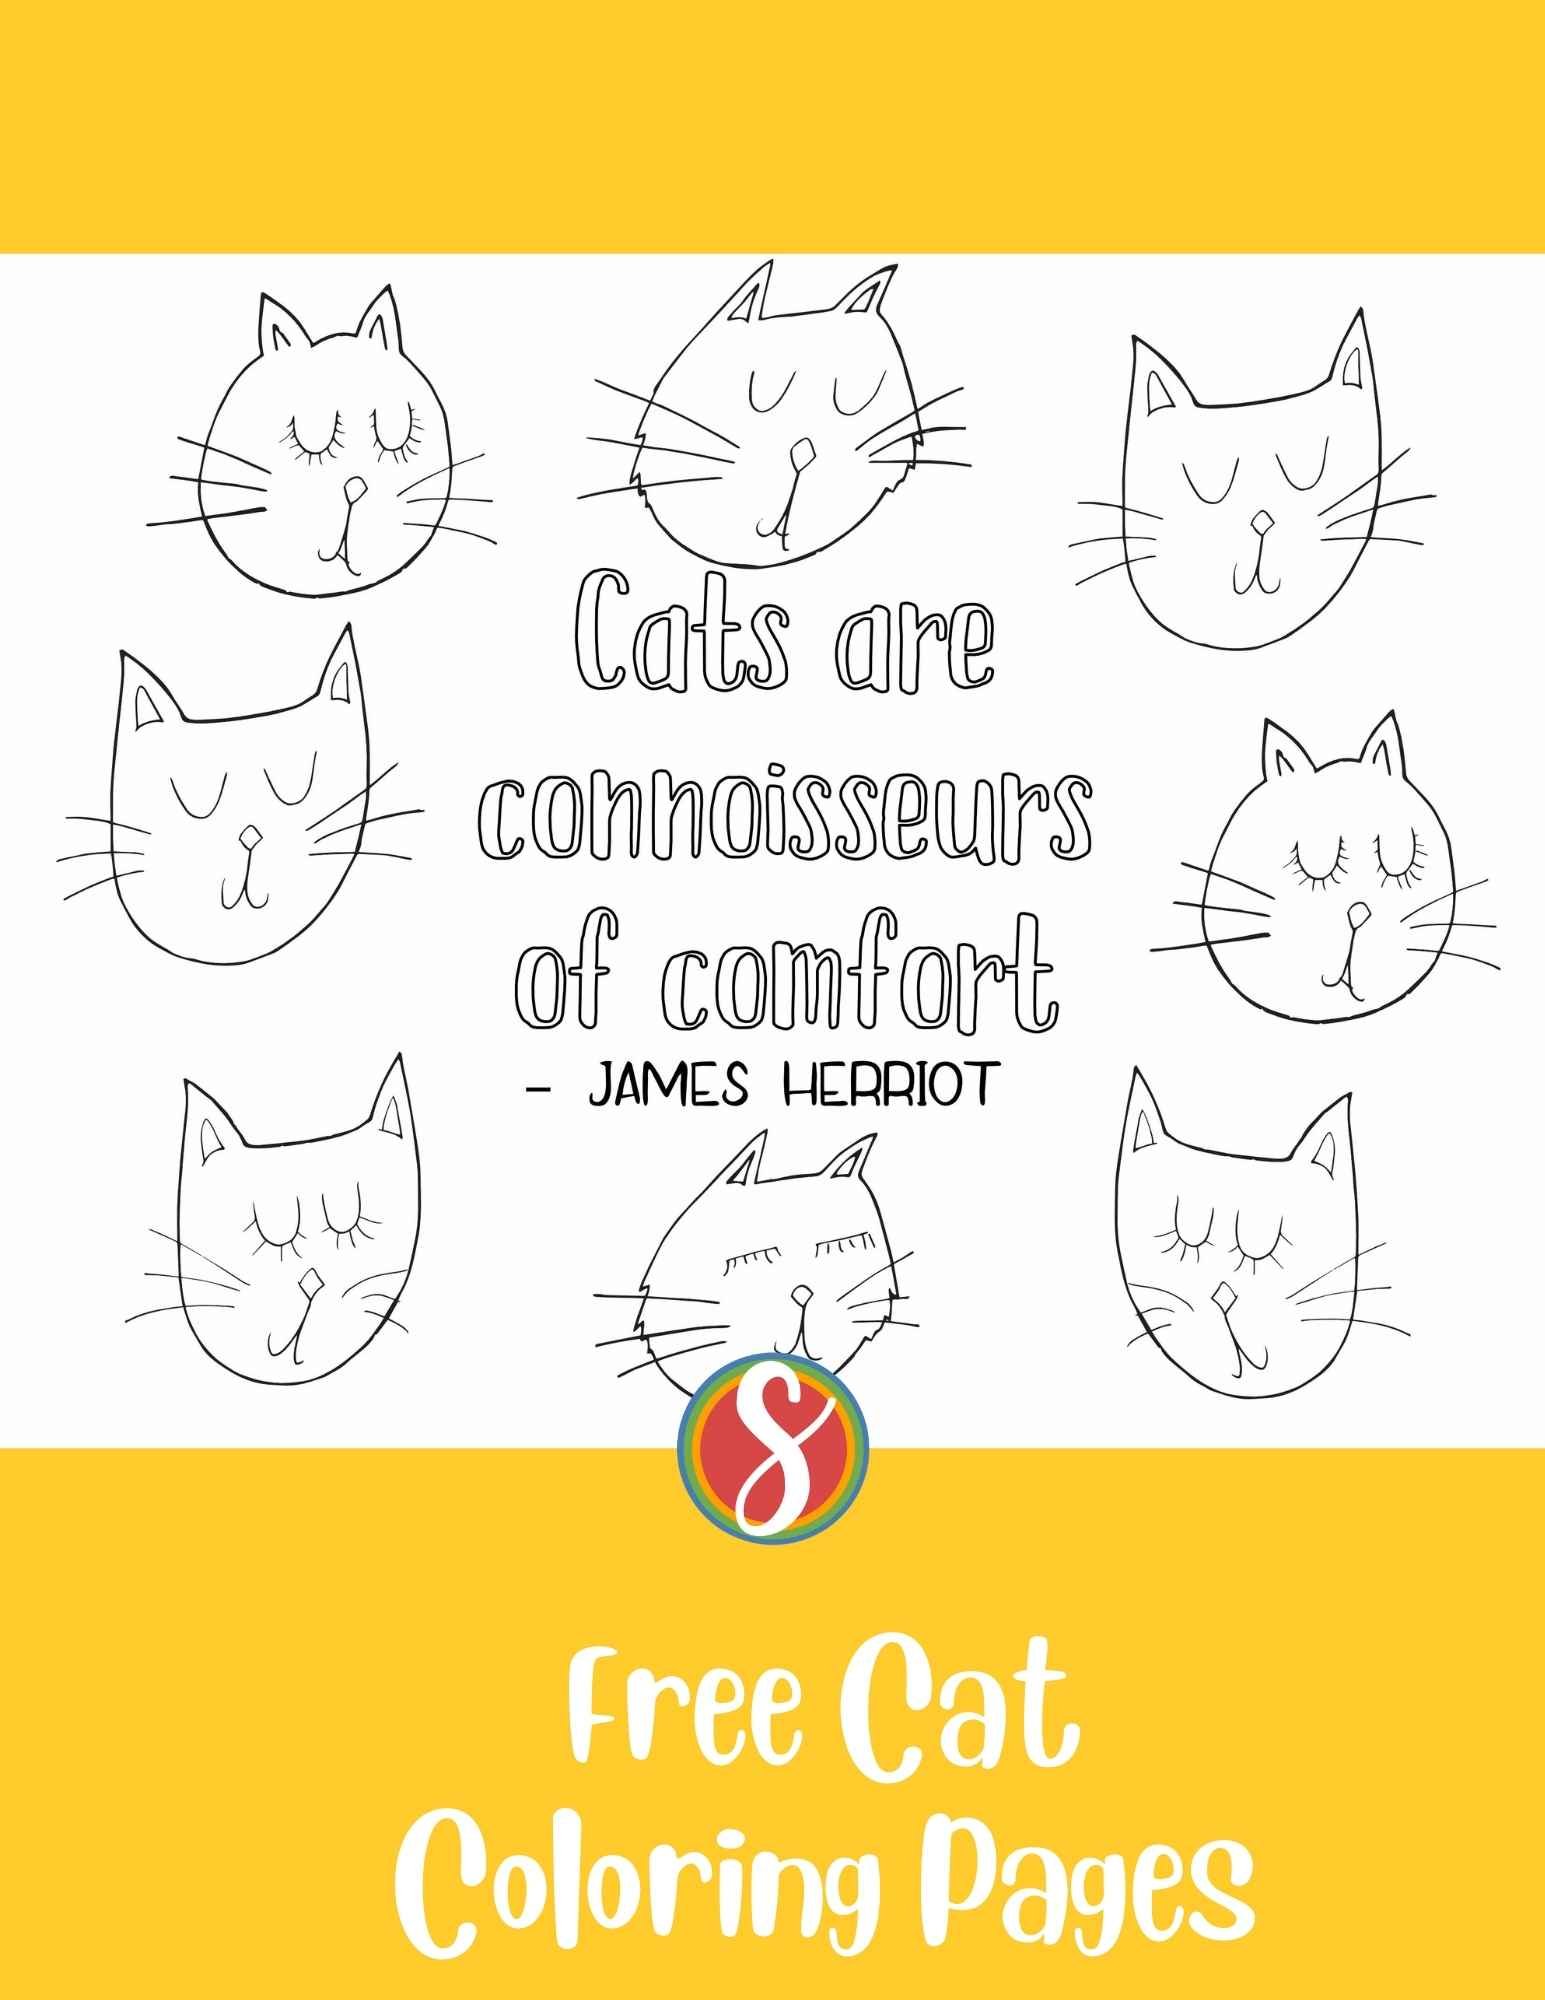 cat quote surrounded by cat faces on a coloring page